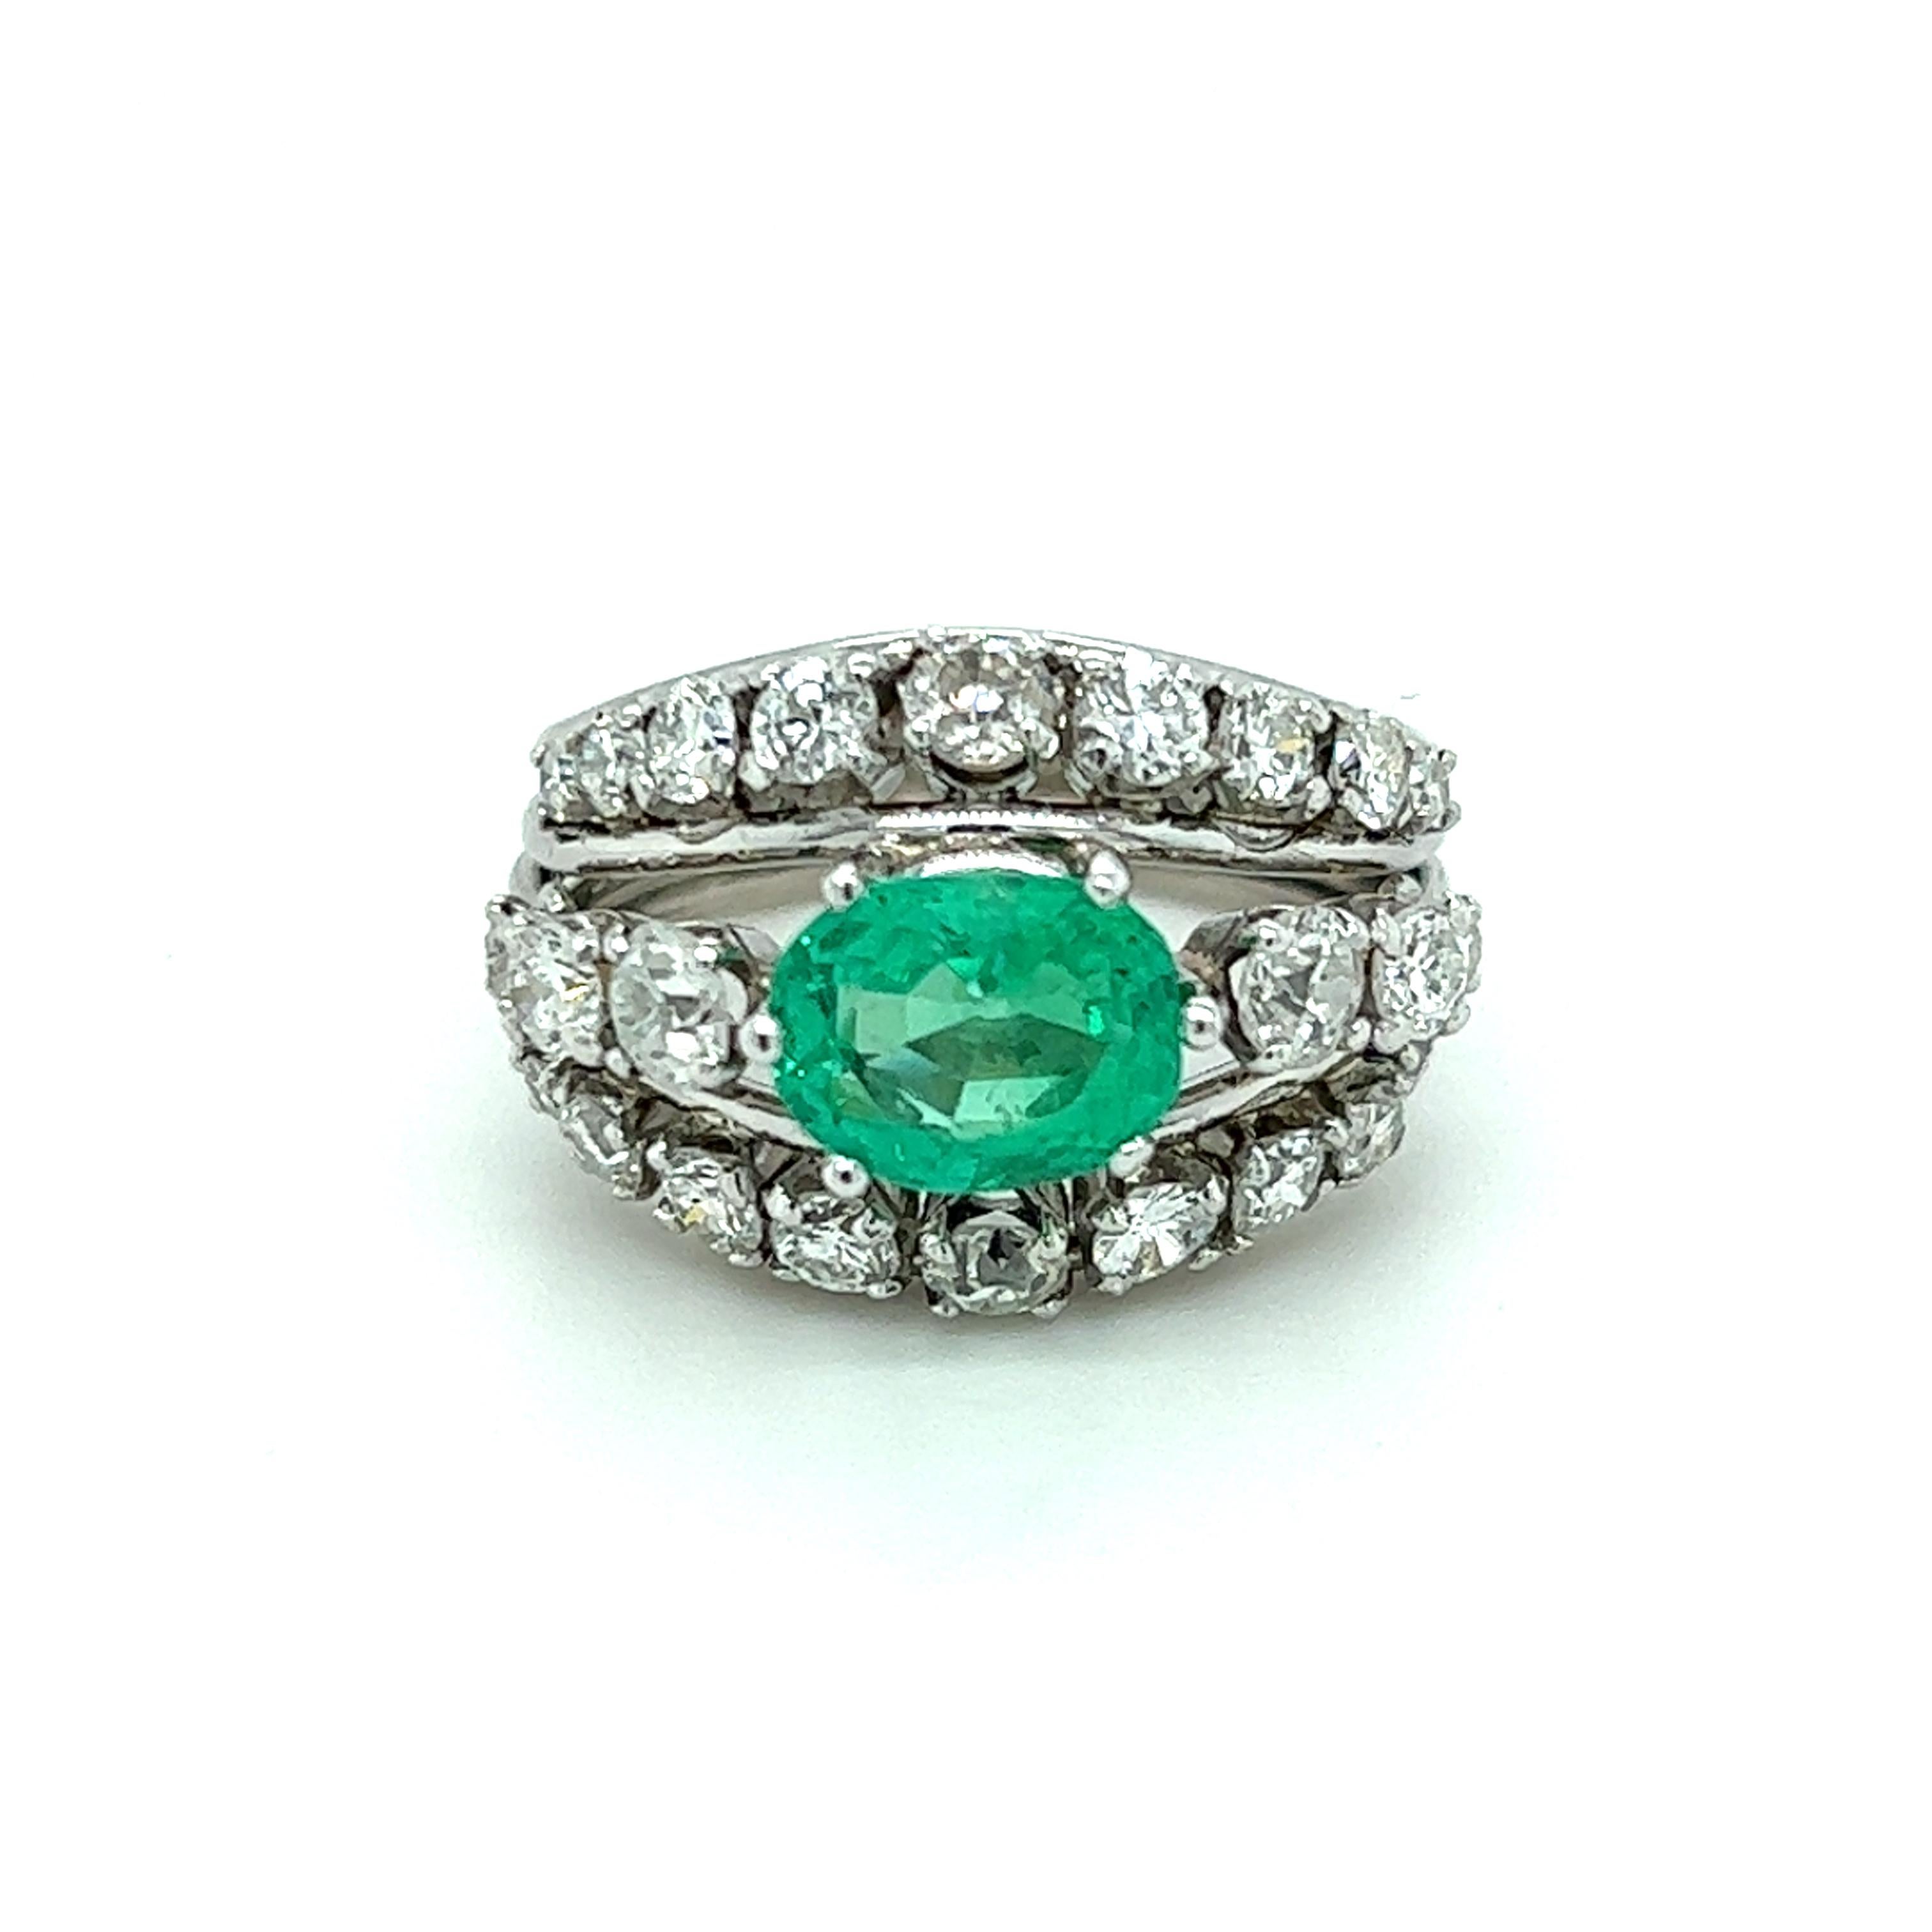 One beautifully constructed platinum wire construction dome ring set with one 8x6mm oval fine natural emerald, approximately 1.05 carat, and twenty-four (24) European cut diamonds, approximately 1.50 carat total weight with matching H/I color and